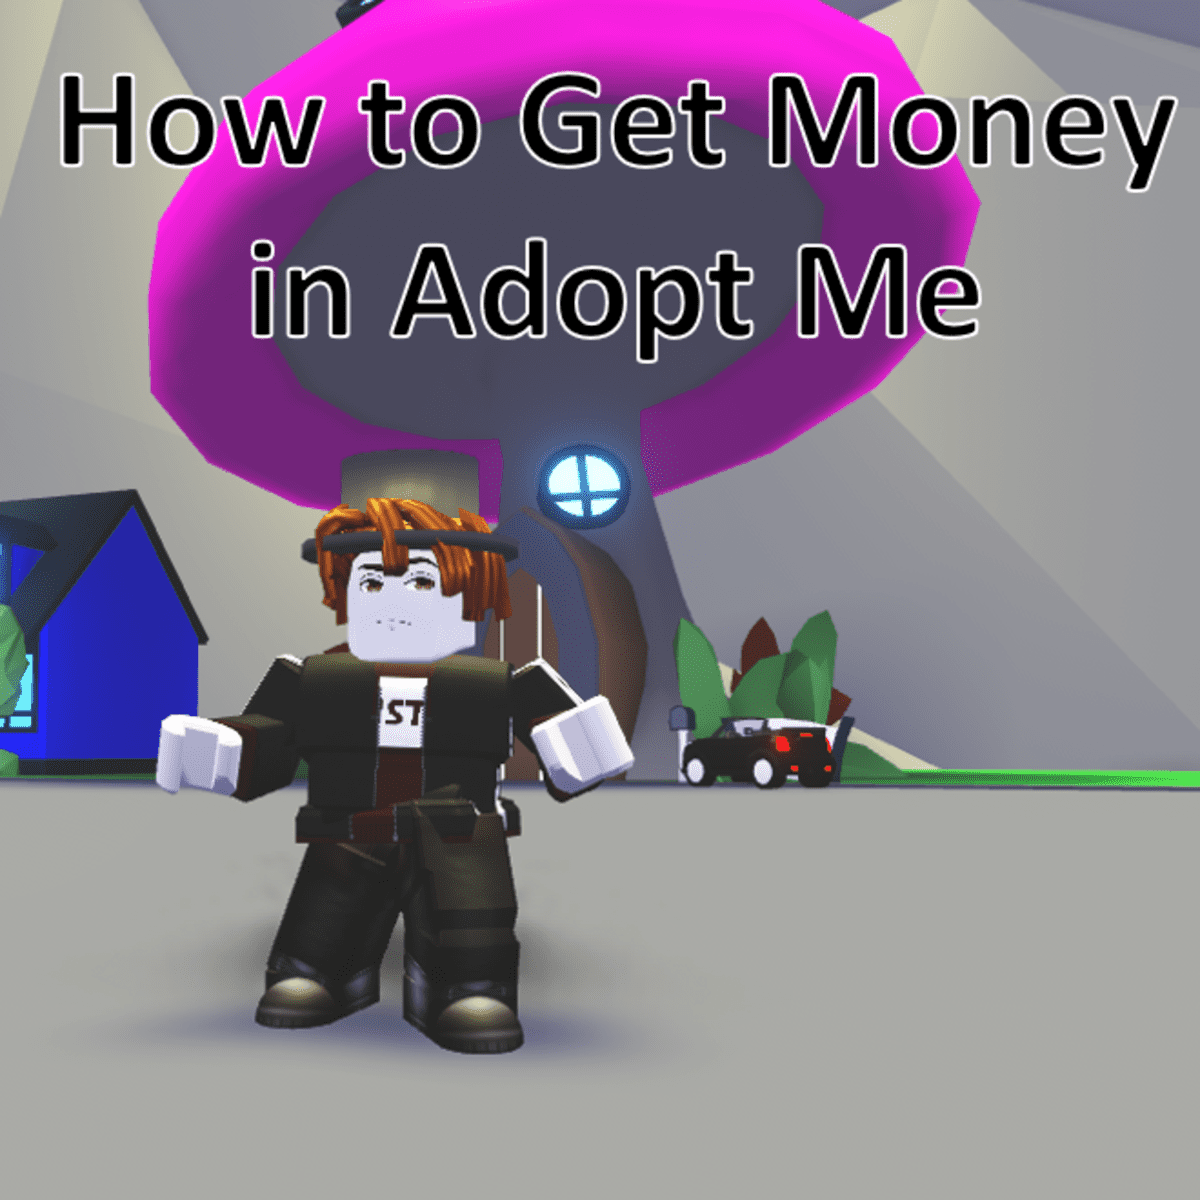 Roblox Adopt Me How To Get Money Levelskip - how people to a party on roblox game adopt me